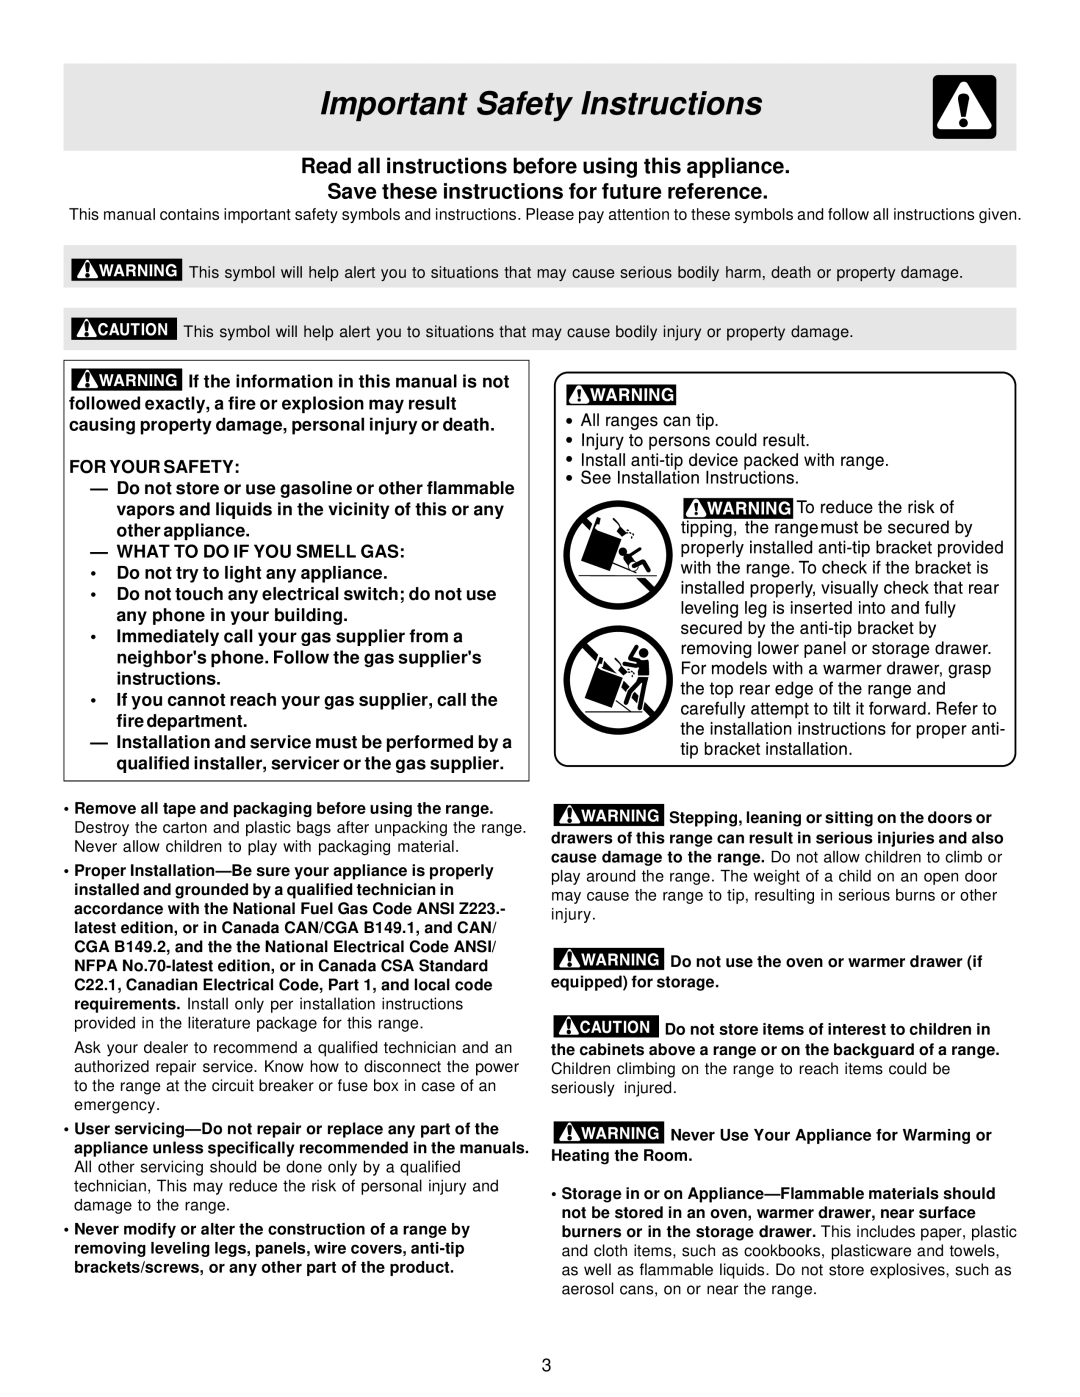 Frigidaire ES400 manual Important Safety Instructions, Read all instructions before using this appliance, For Your Safety 